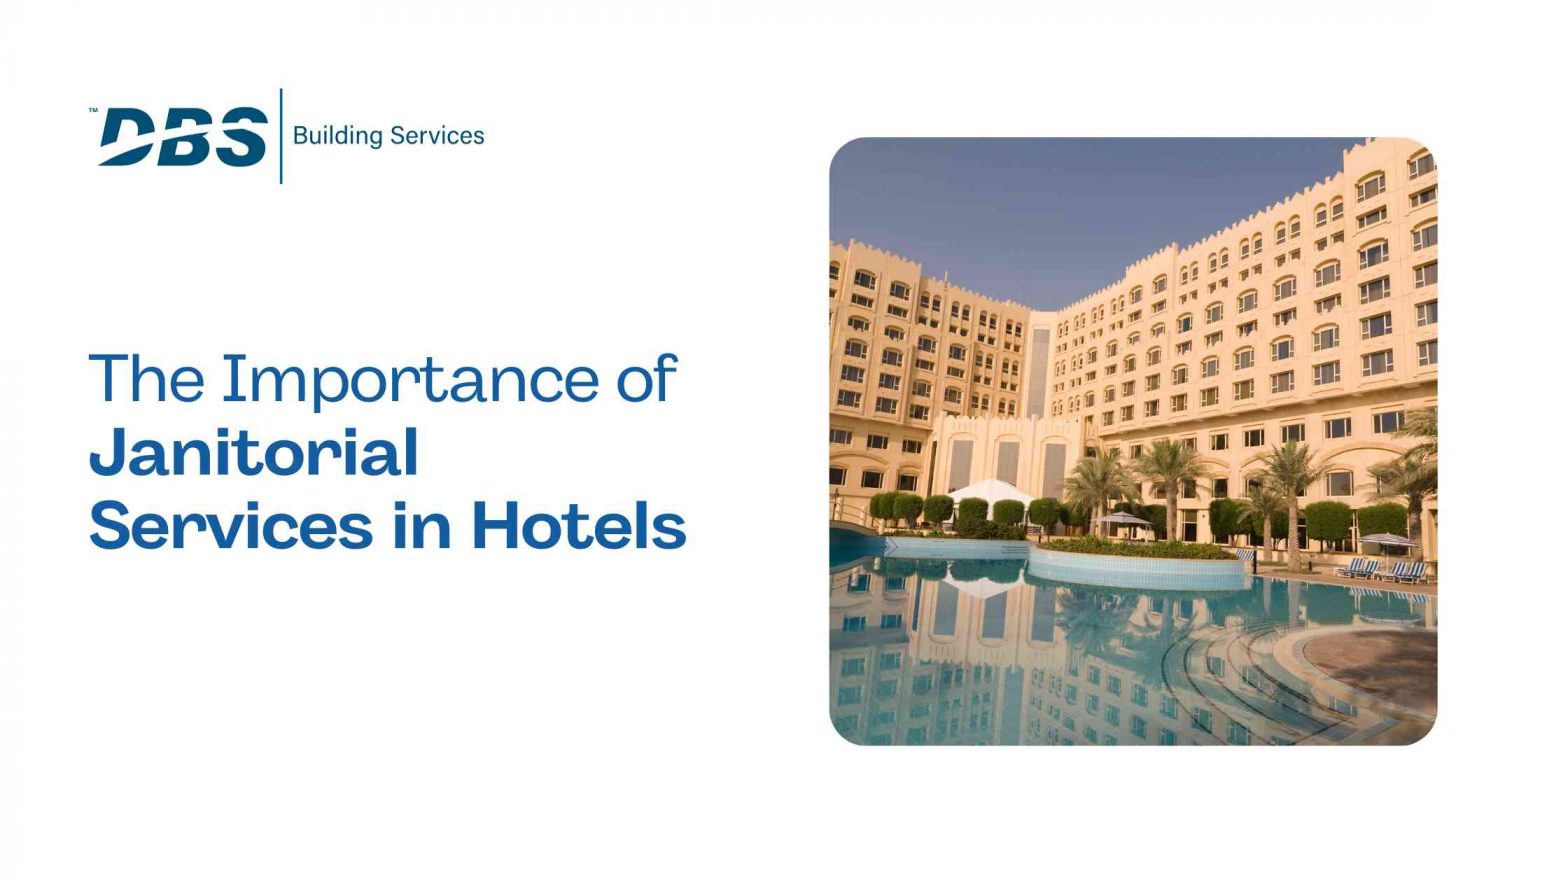 Janitorial Services in Hotels